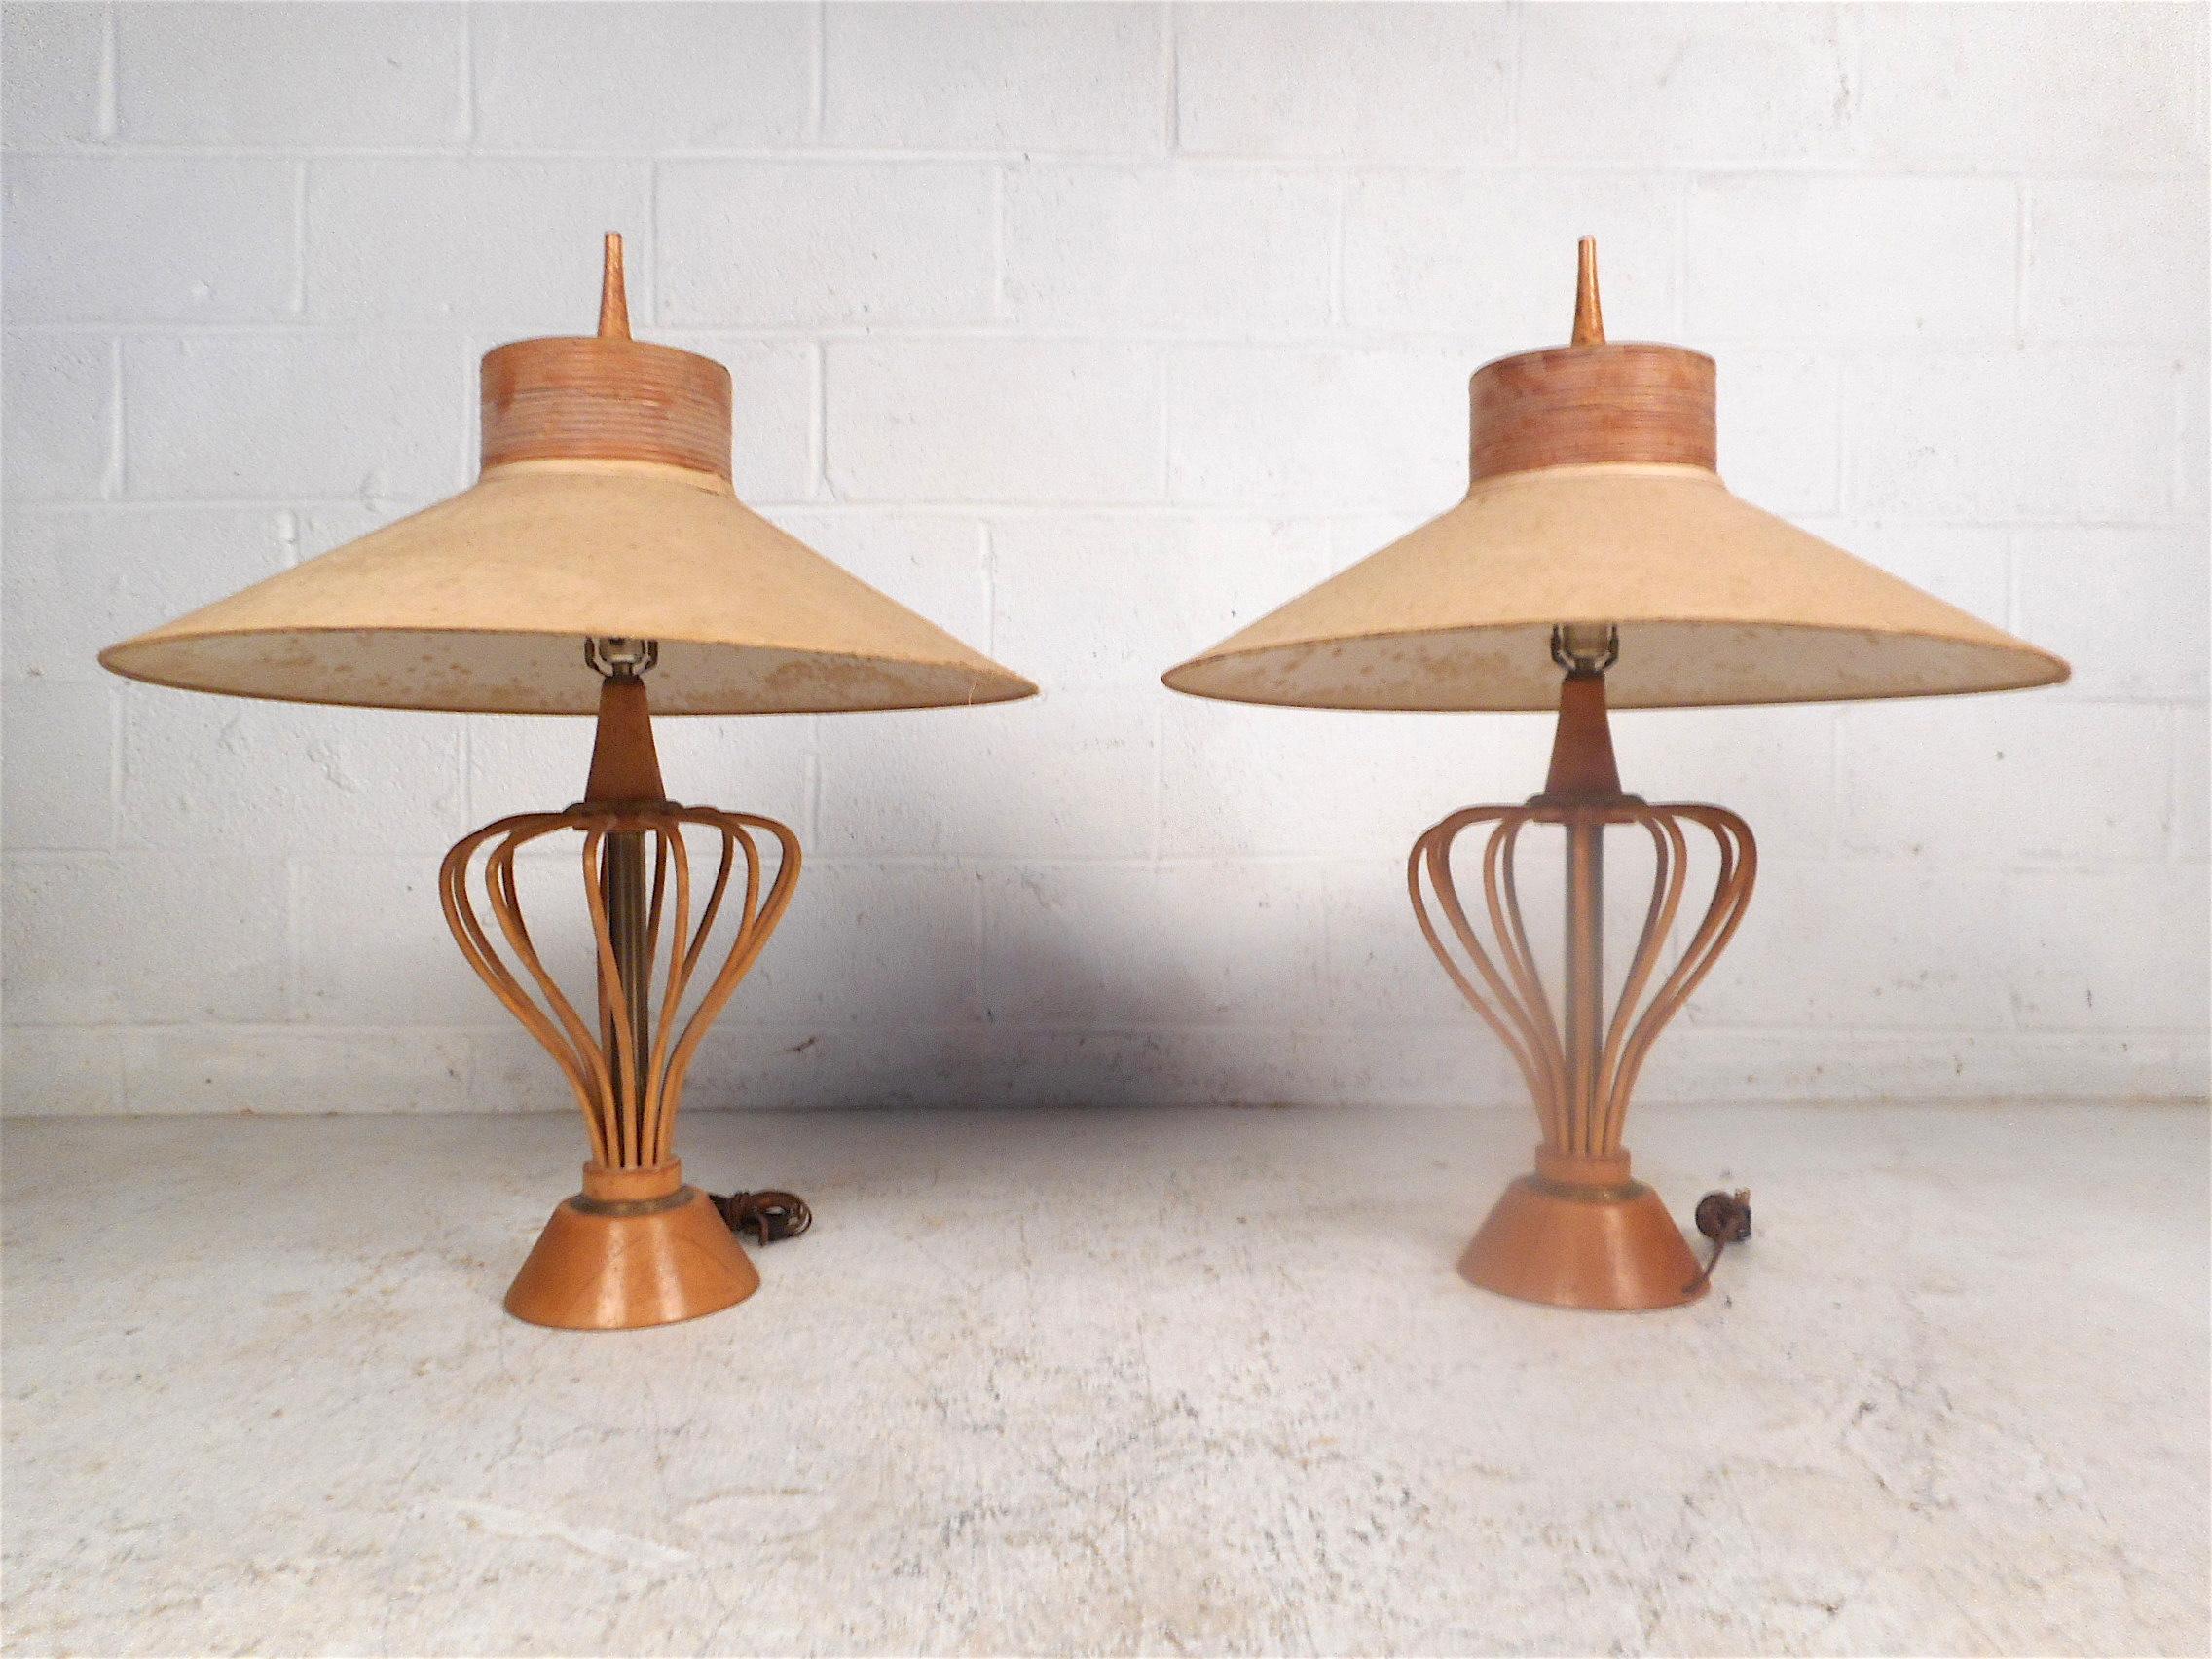 Unusual pair of midcentury lamps. Stylish and unique design with an array of sculpted wooden rods which give these lamps an interesting look. The brass columns which span the center of the lamps along with oversized shades add to the allure. These